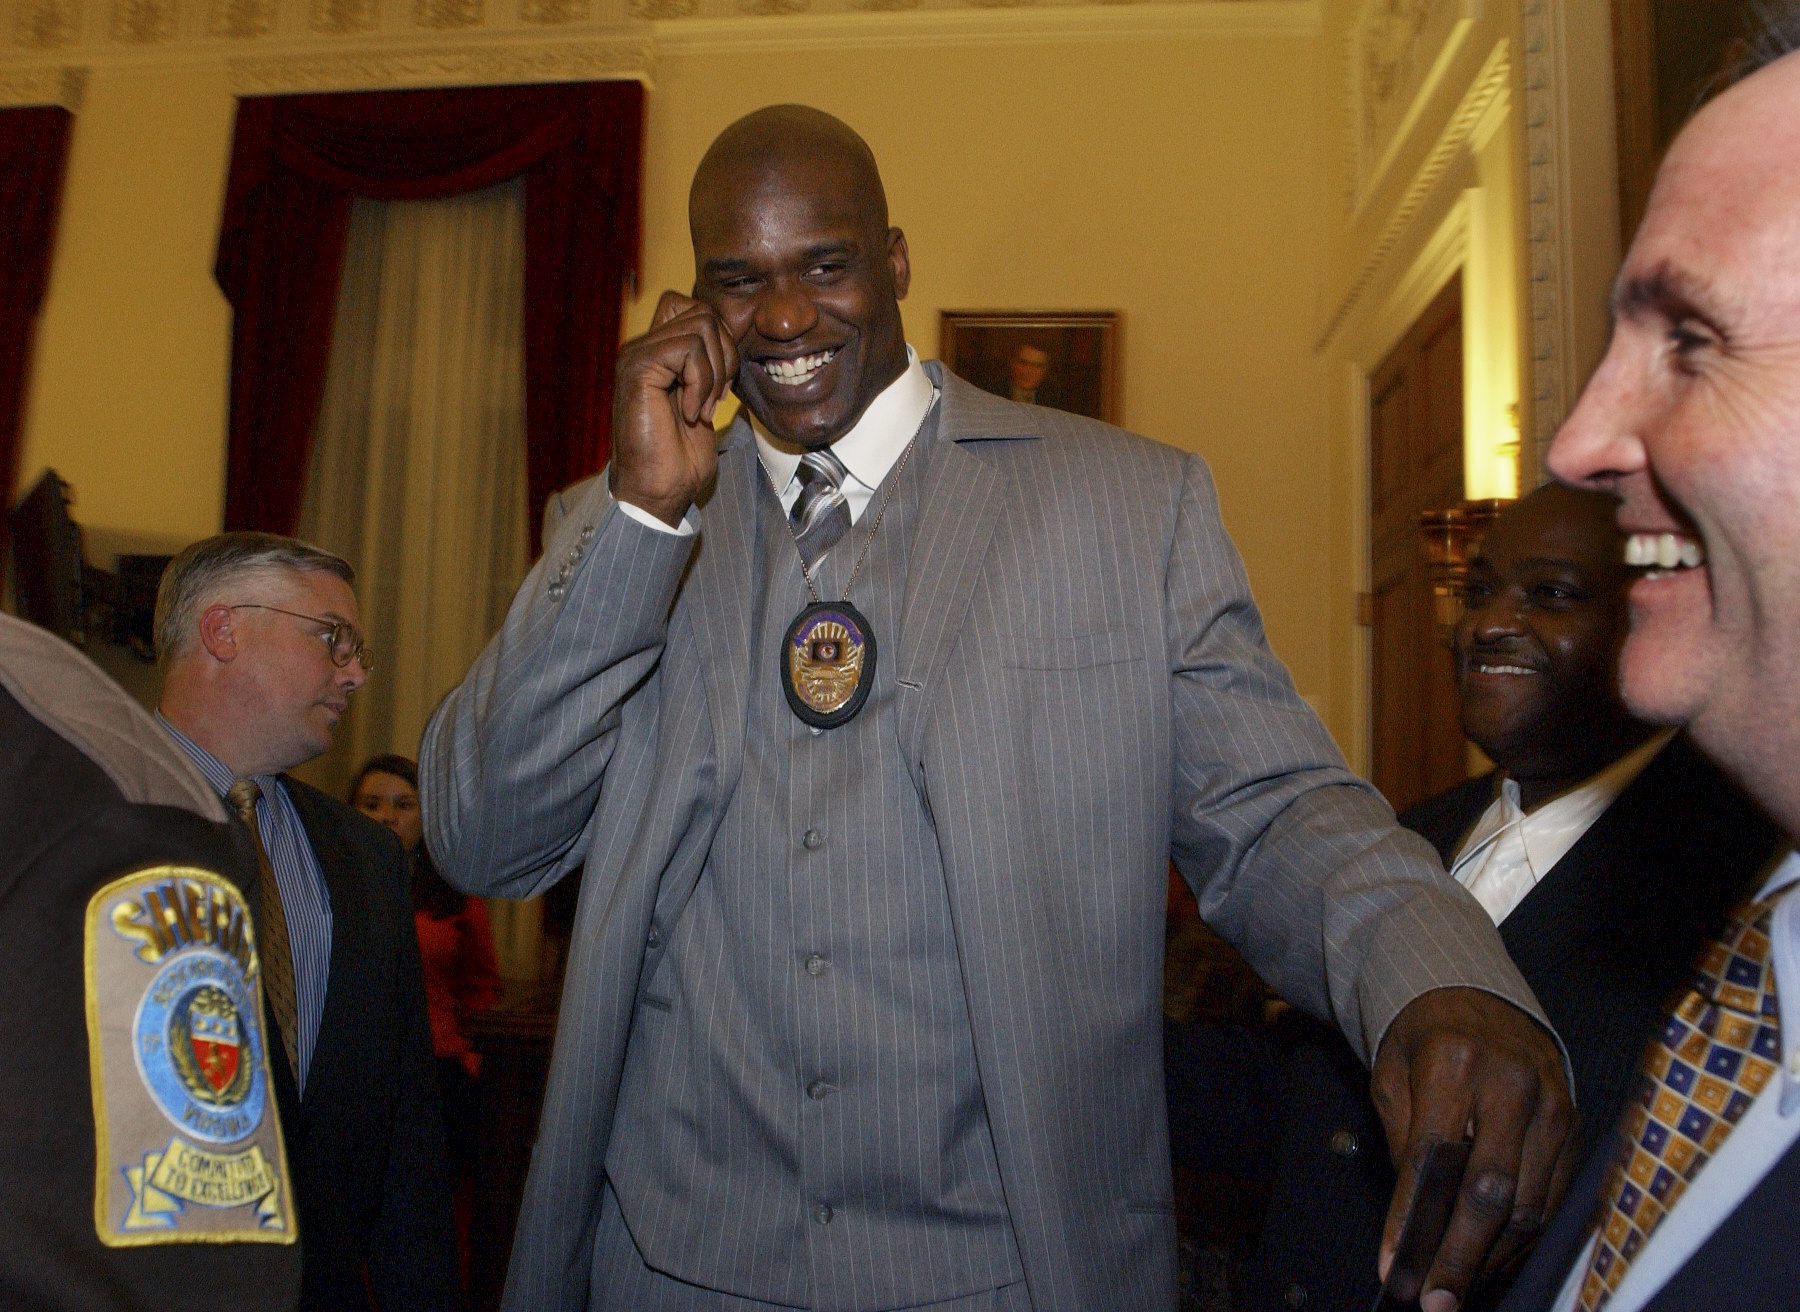 Even before Tuesday's roadside assistance, Shaquille O'Neal has a history of helping strangers and law enforcment.